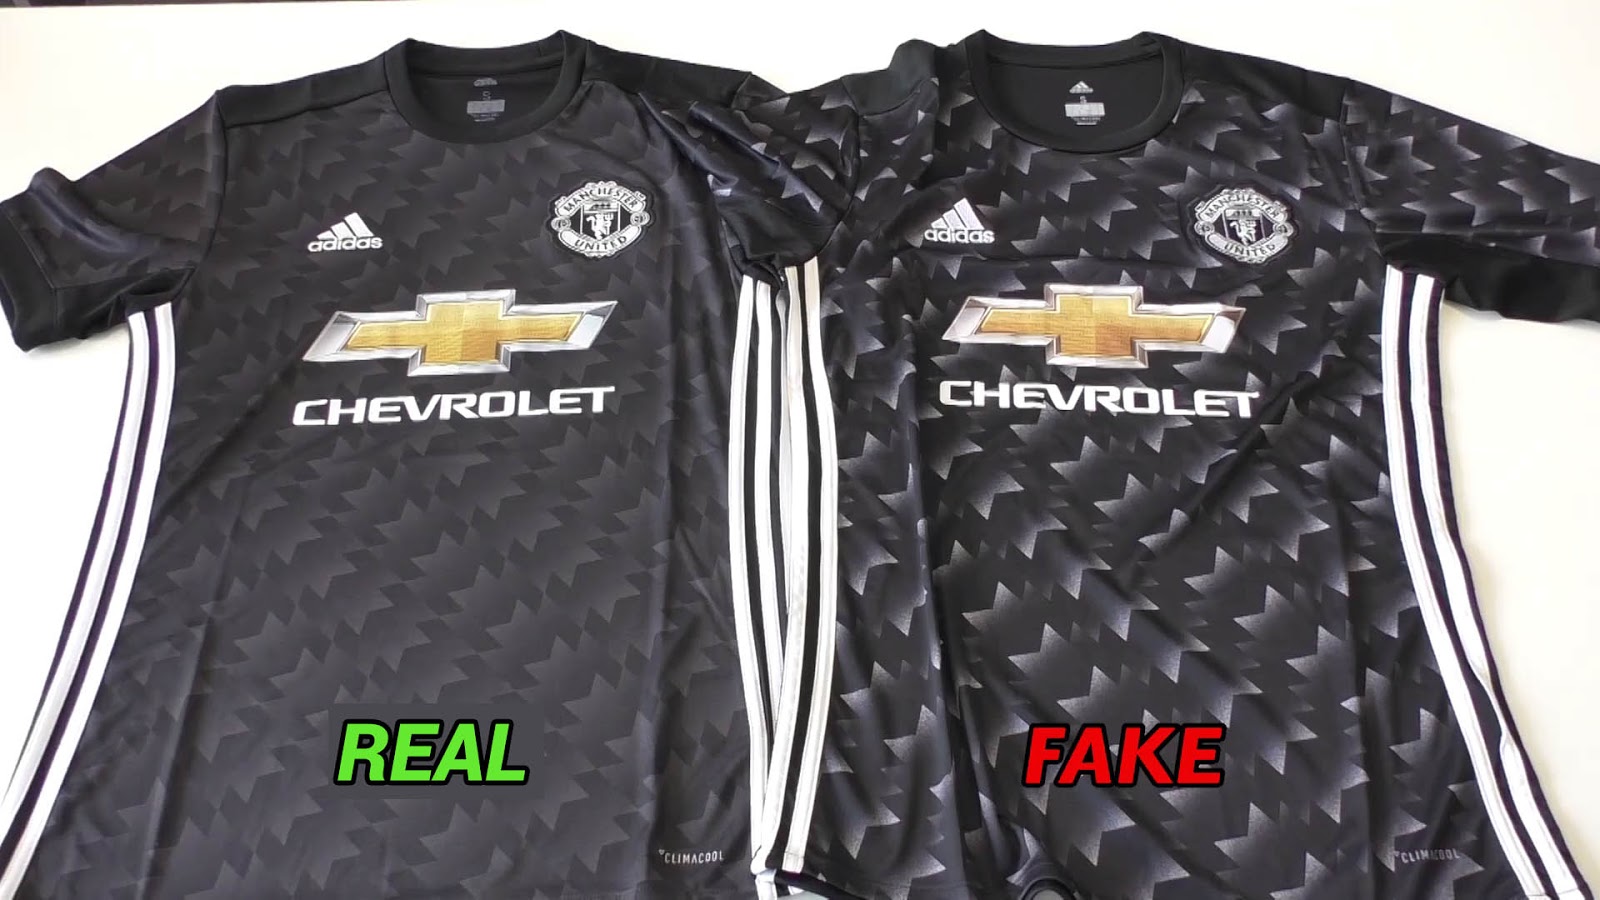 What is the difference between authentic and replica jerseys, and